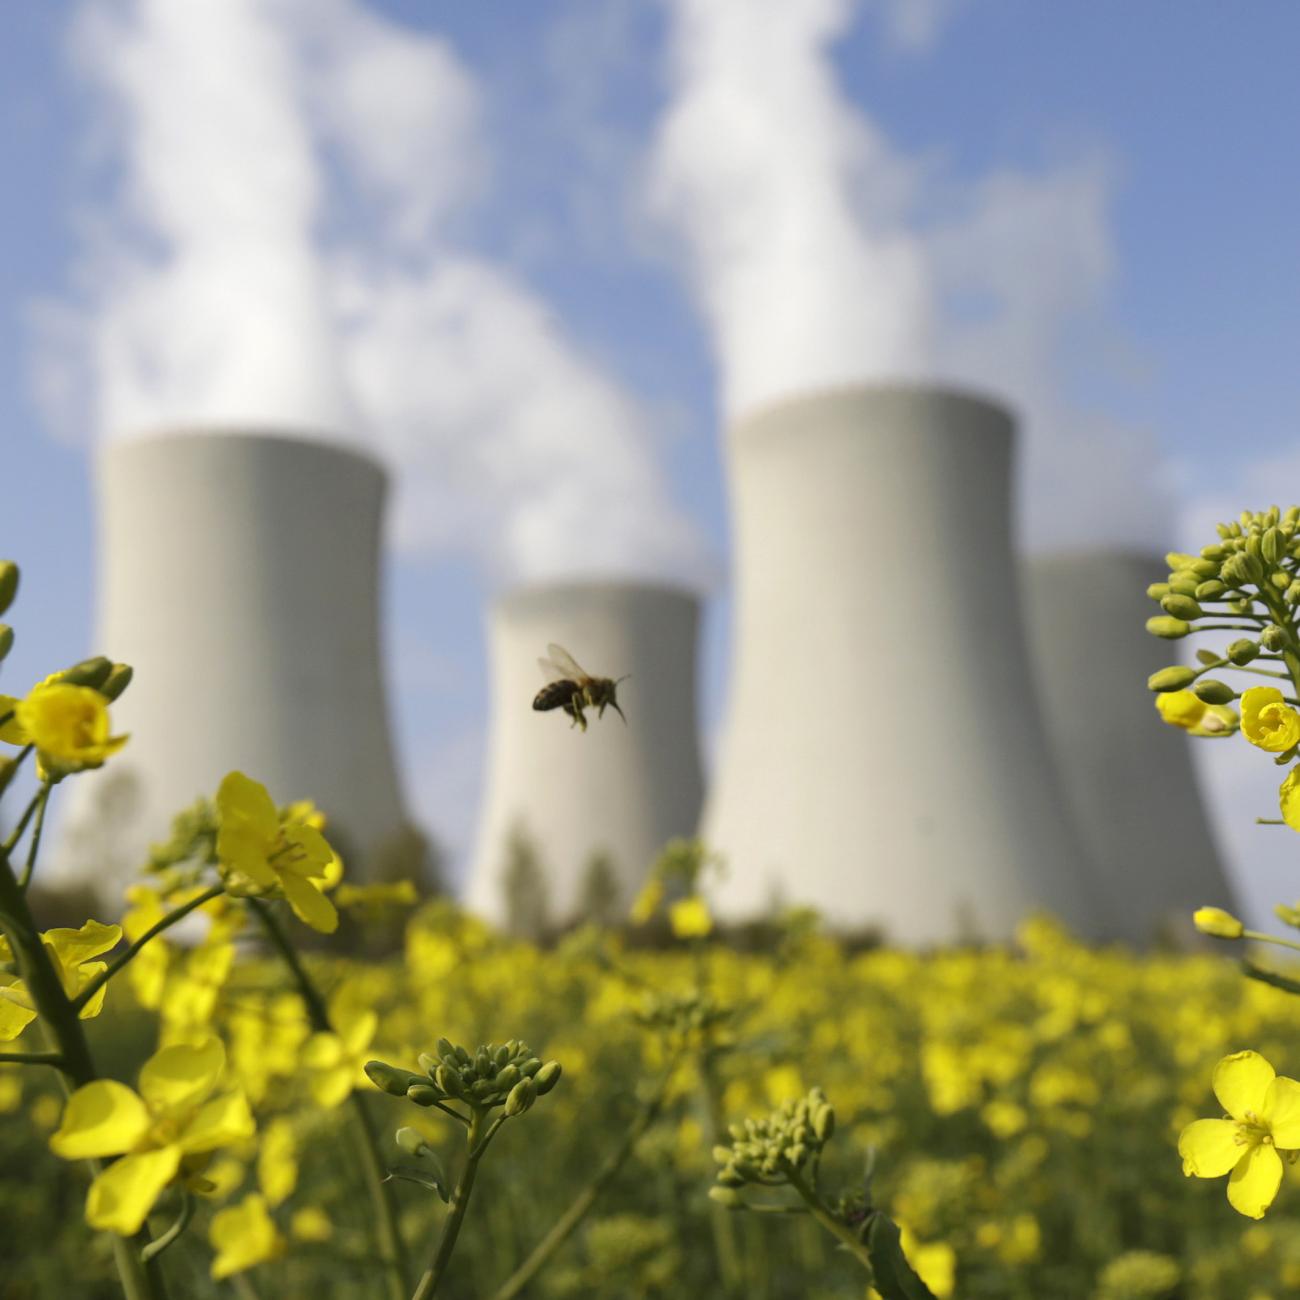 Concrete nuclear reactor towers bellowing pillars of white smoke stand against a blue sky. In the foreground a bee flits between bright yellow flowers atop leafy green stems